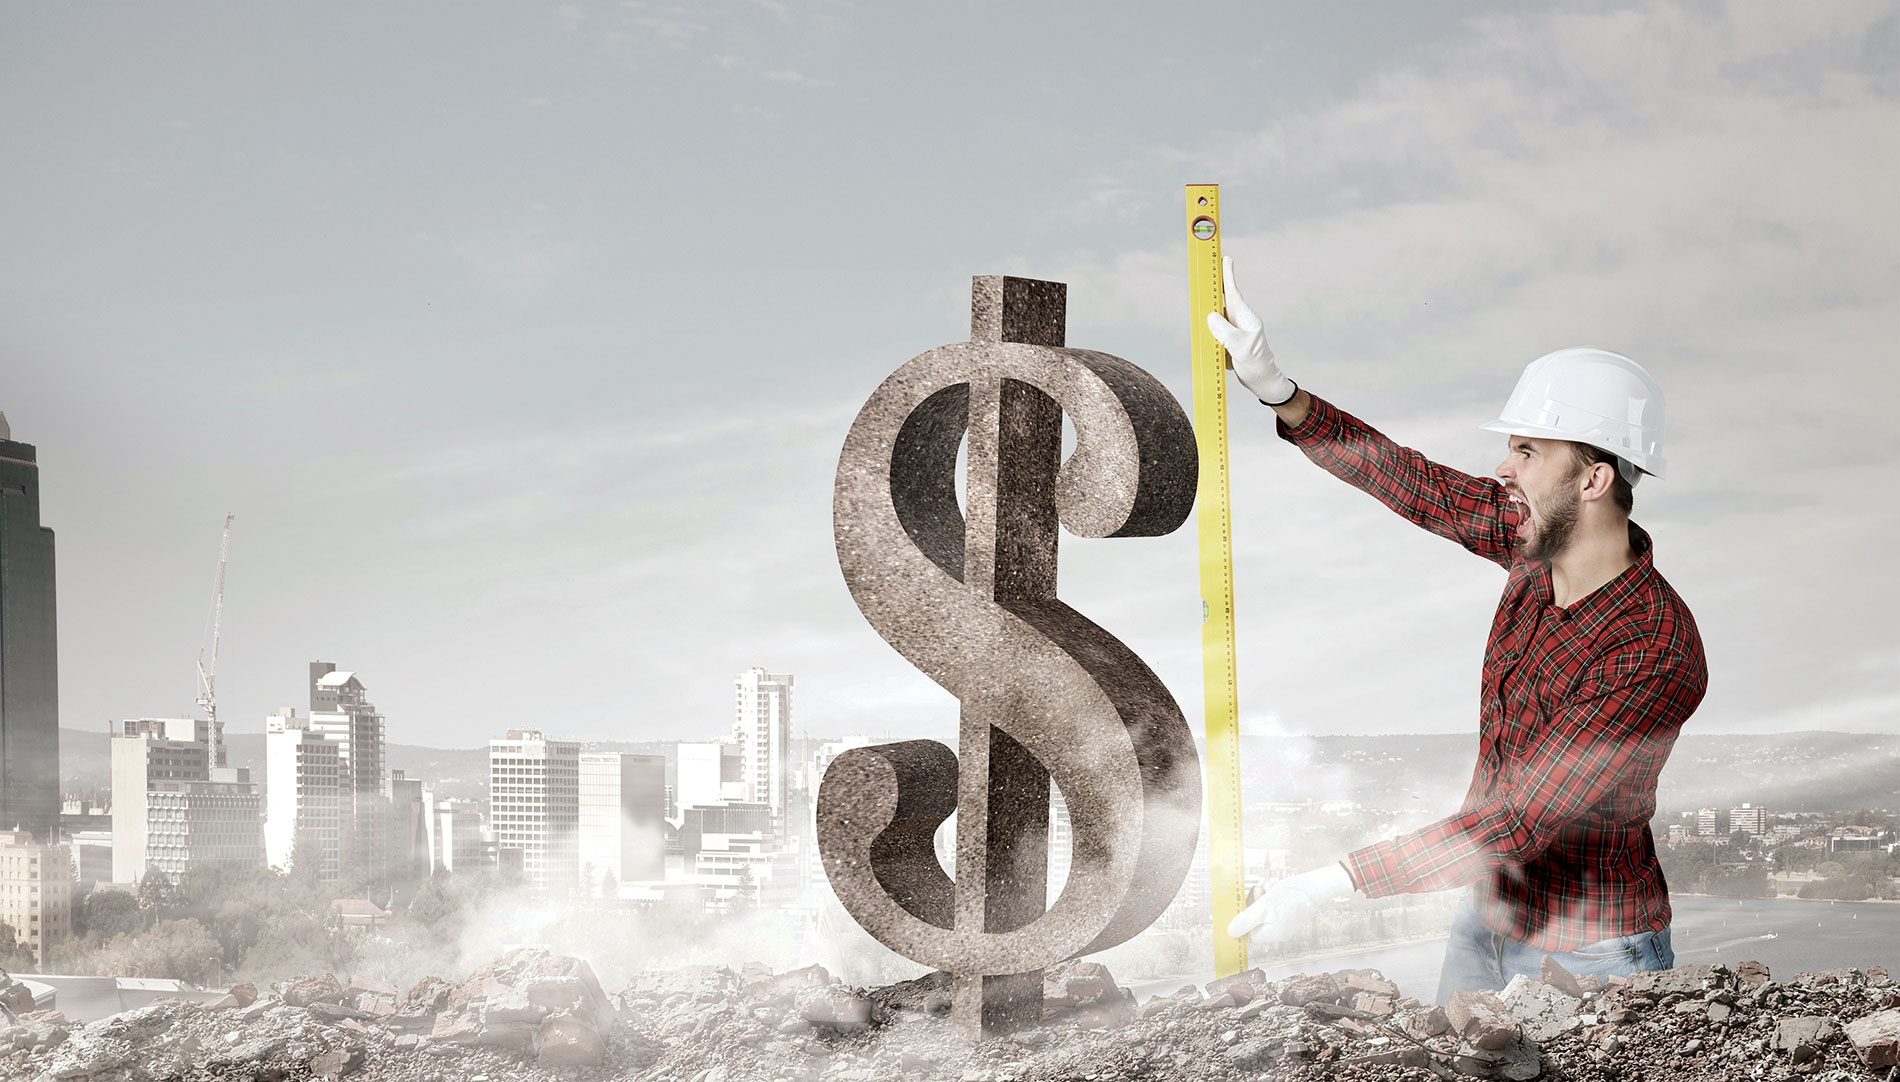 A worker holds a measuring stick up to a stone dollar sign against a gray city background. Image by stock.adobe.com / Sergey Nivens.